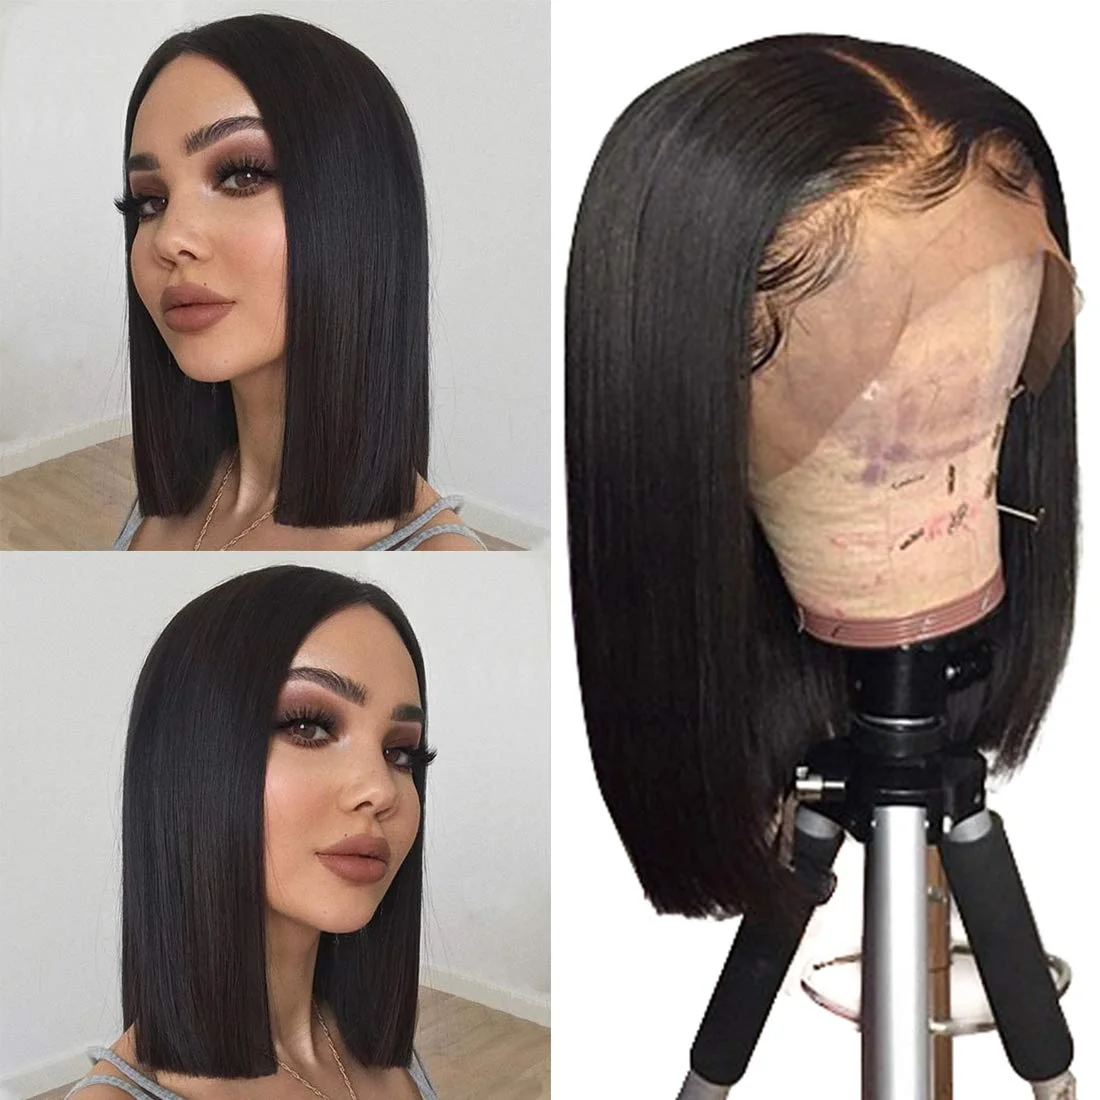 Brazilian Bob human Wig Lace Front Wigs For Black Women Short Straight Human Hair aby Hair Natural Black 150% Density Wigs